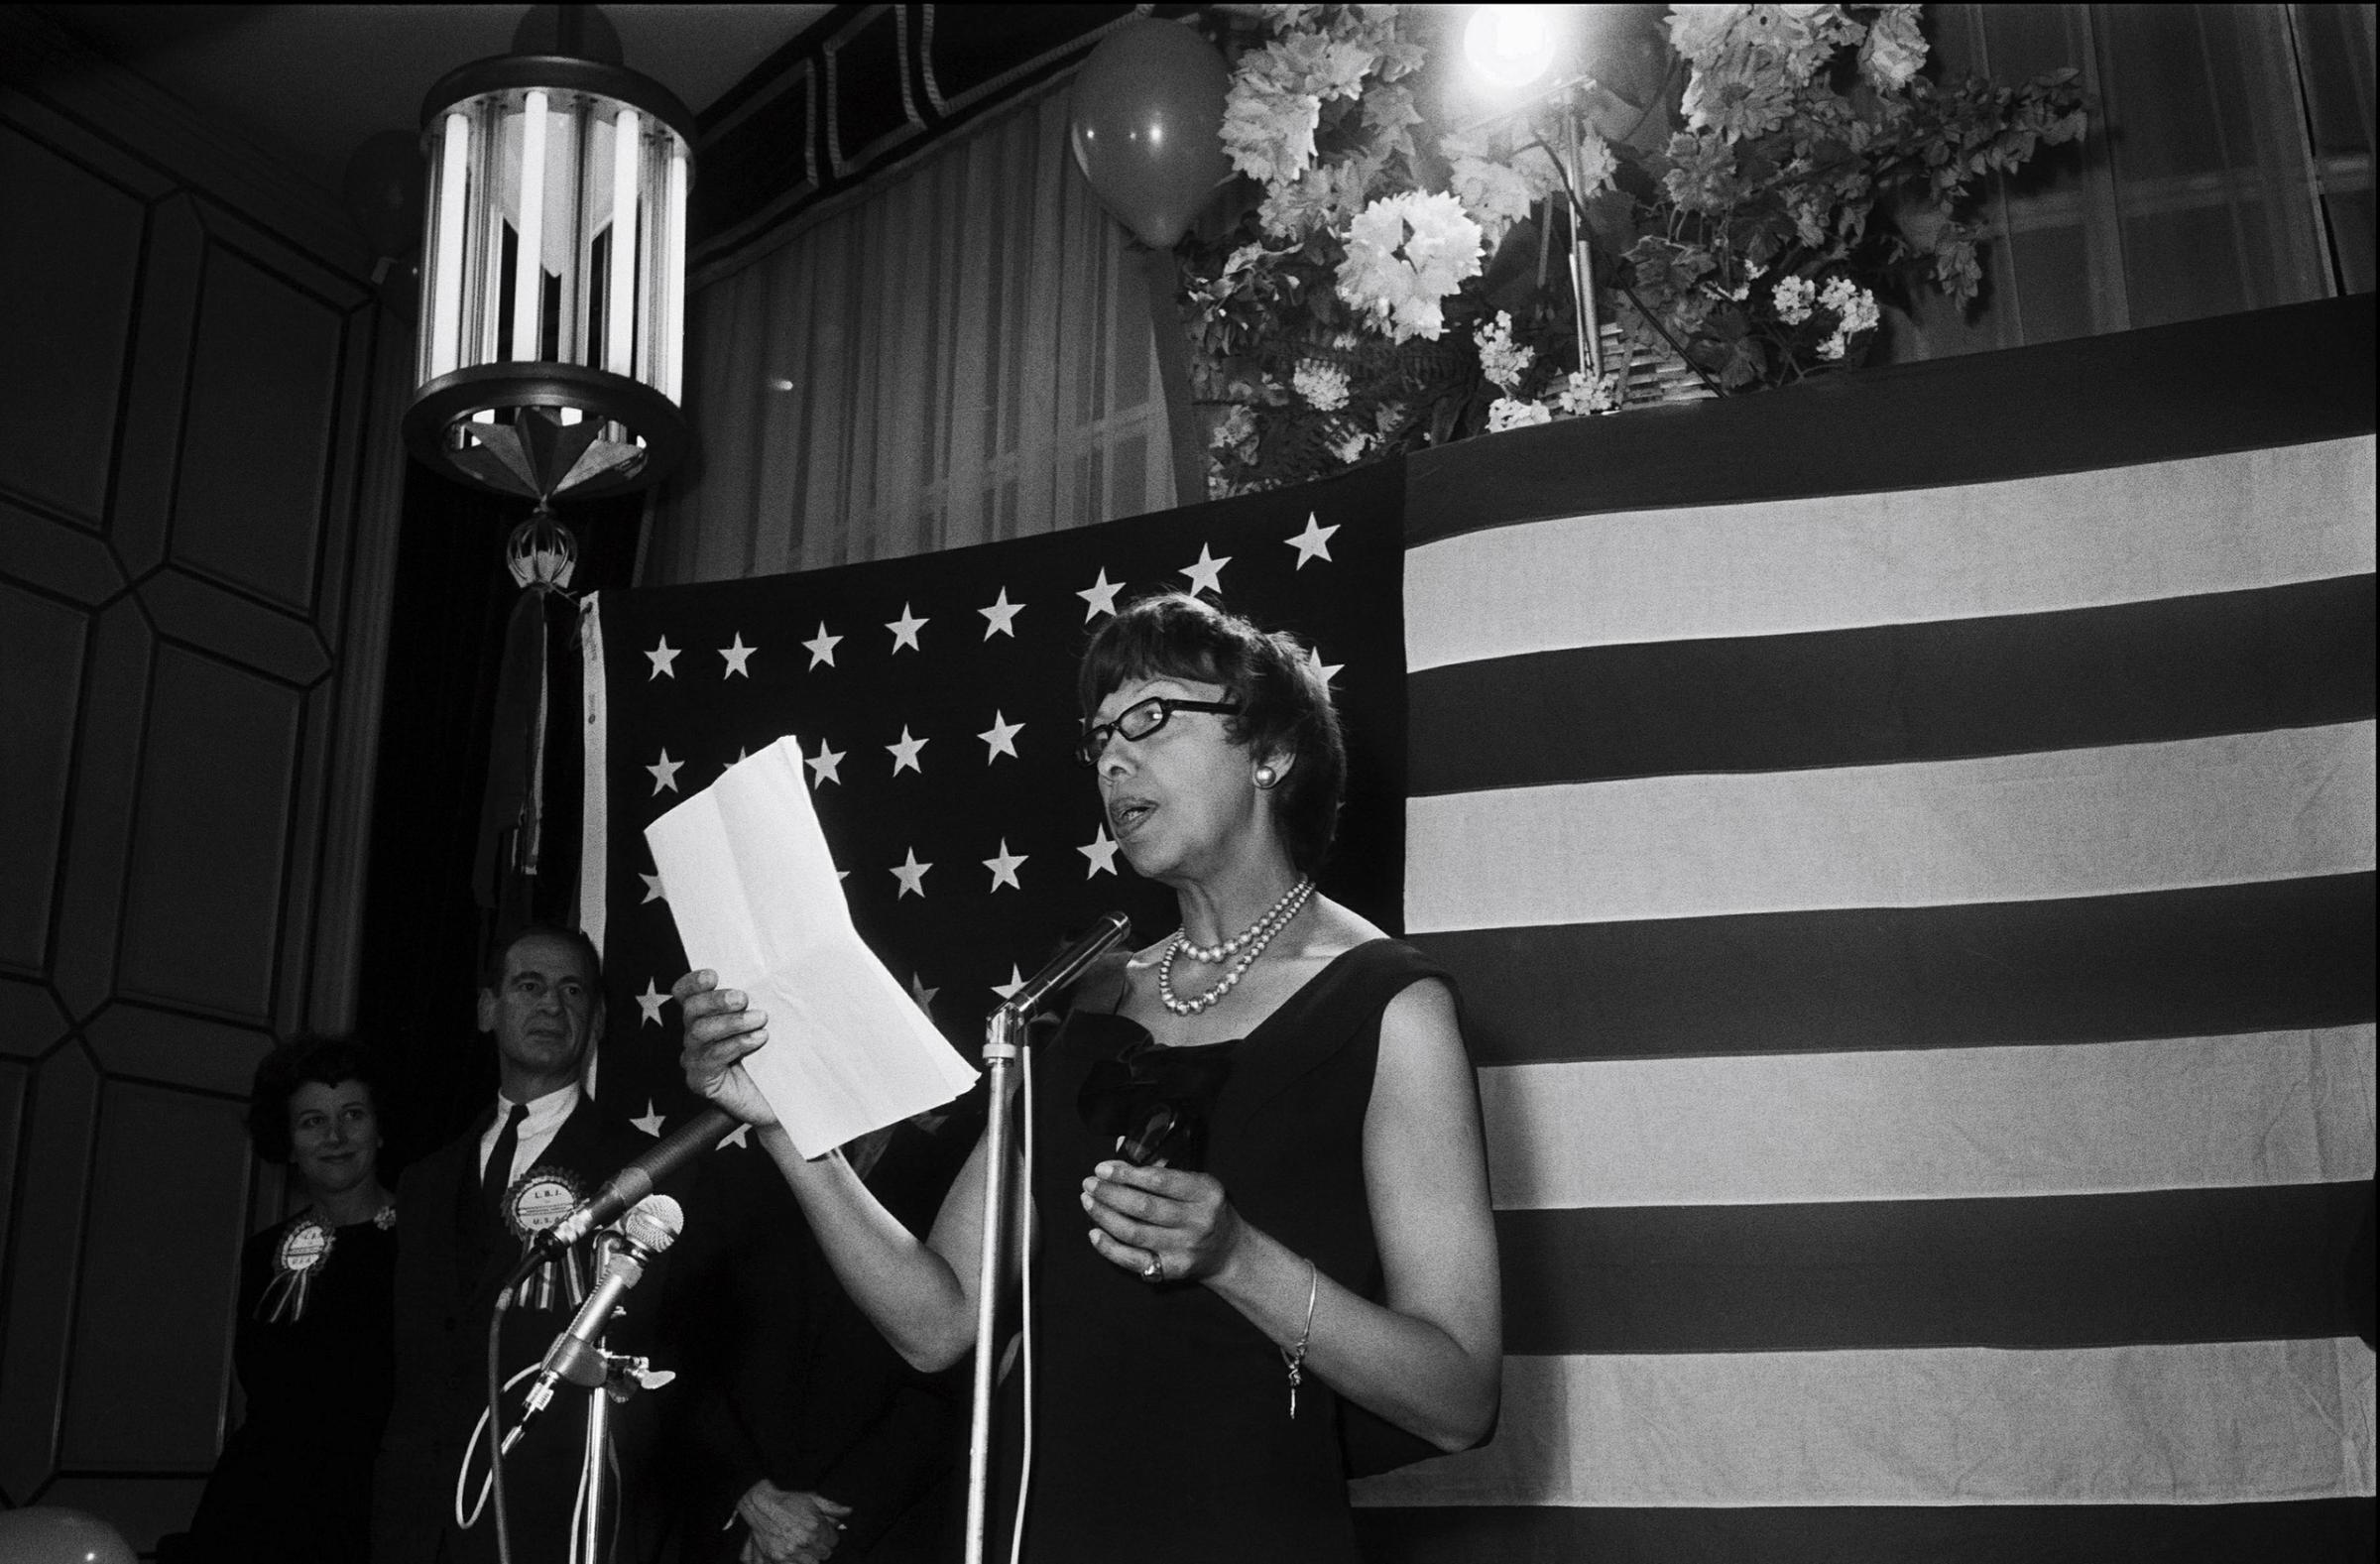 Josephine Baker supports Johnson in US elections in United States in October 1964.